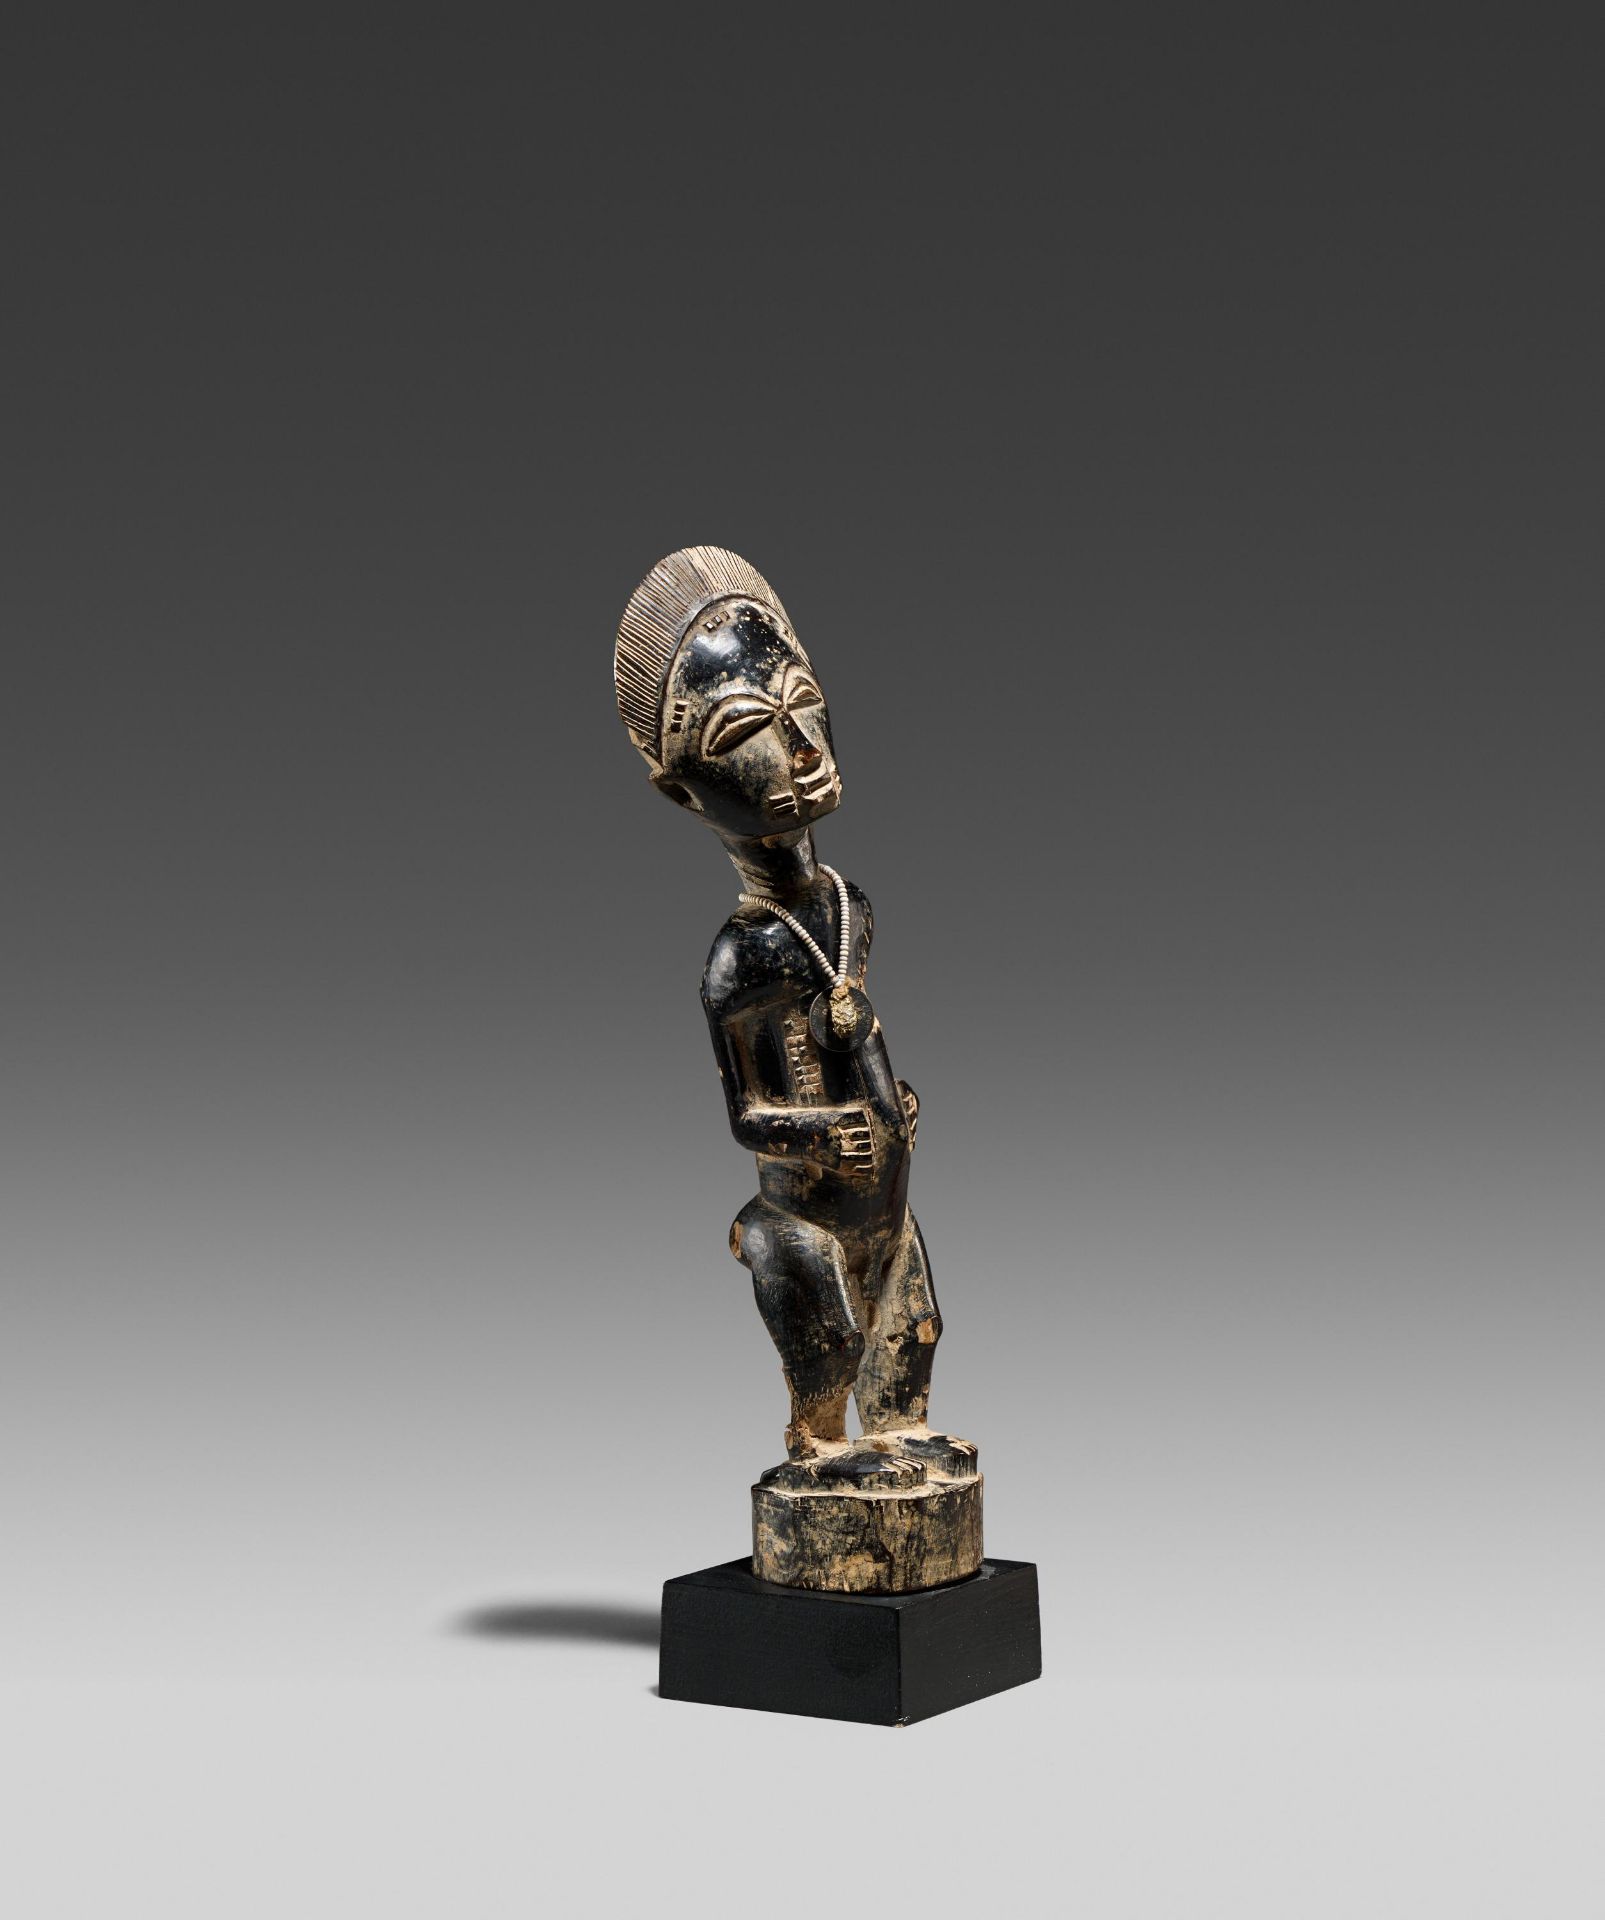 BAULE, Ivory Coast. Male figure. Wood, pearl necklace with a French coin (50 centimes), dark patina.